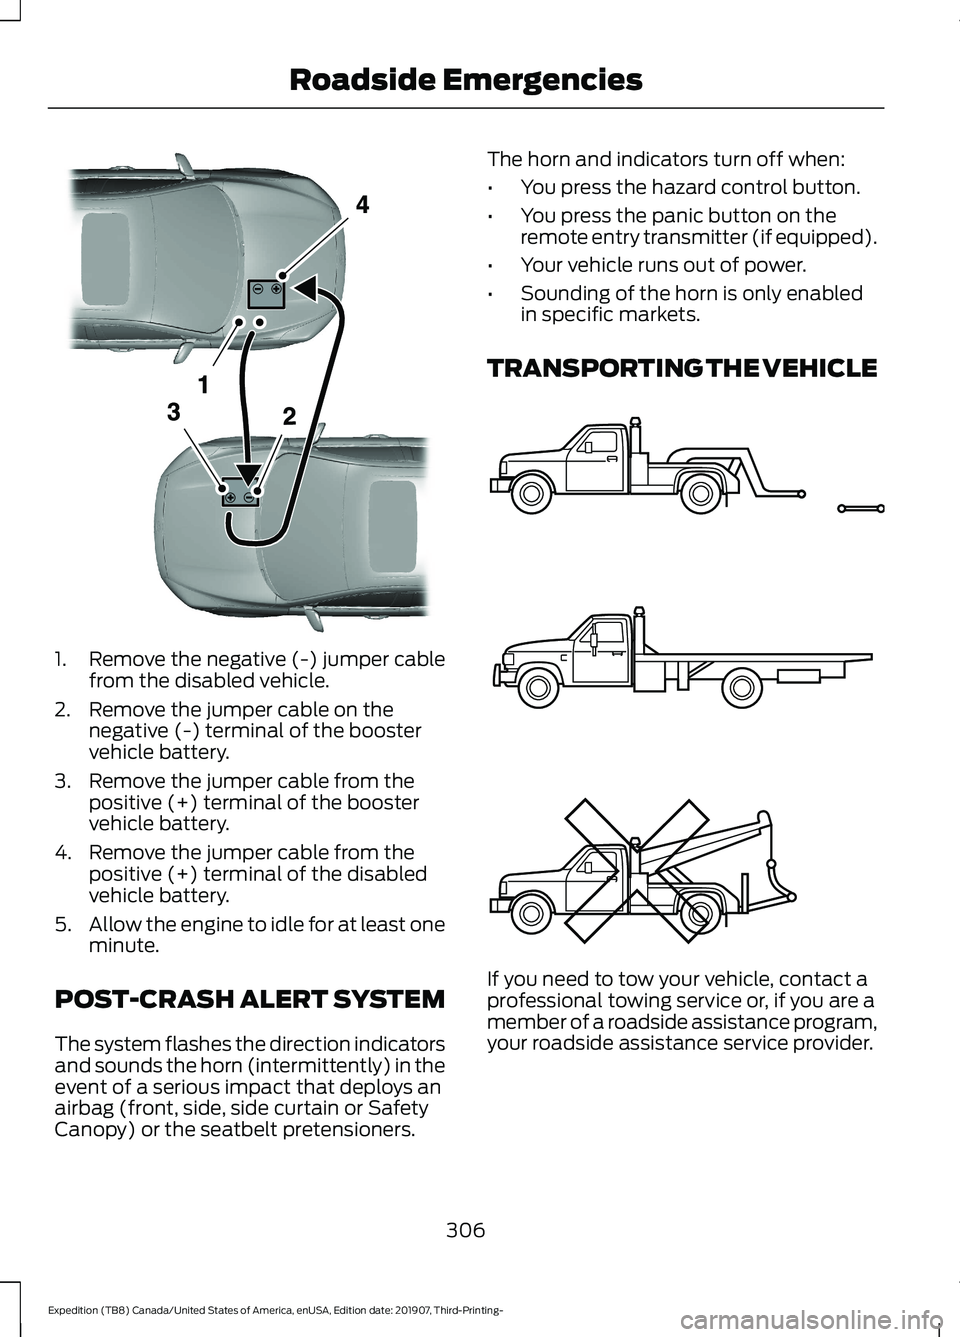 FORD EXPEDITION 2020  Owners Manual 1. Remove the negative (-) jumper cable
from the disabled vehicle.
2. Remove the jumper cable on the negative (-) terminal of the booster
vehicle battery.
3. Remove the jumper cable from the positive 